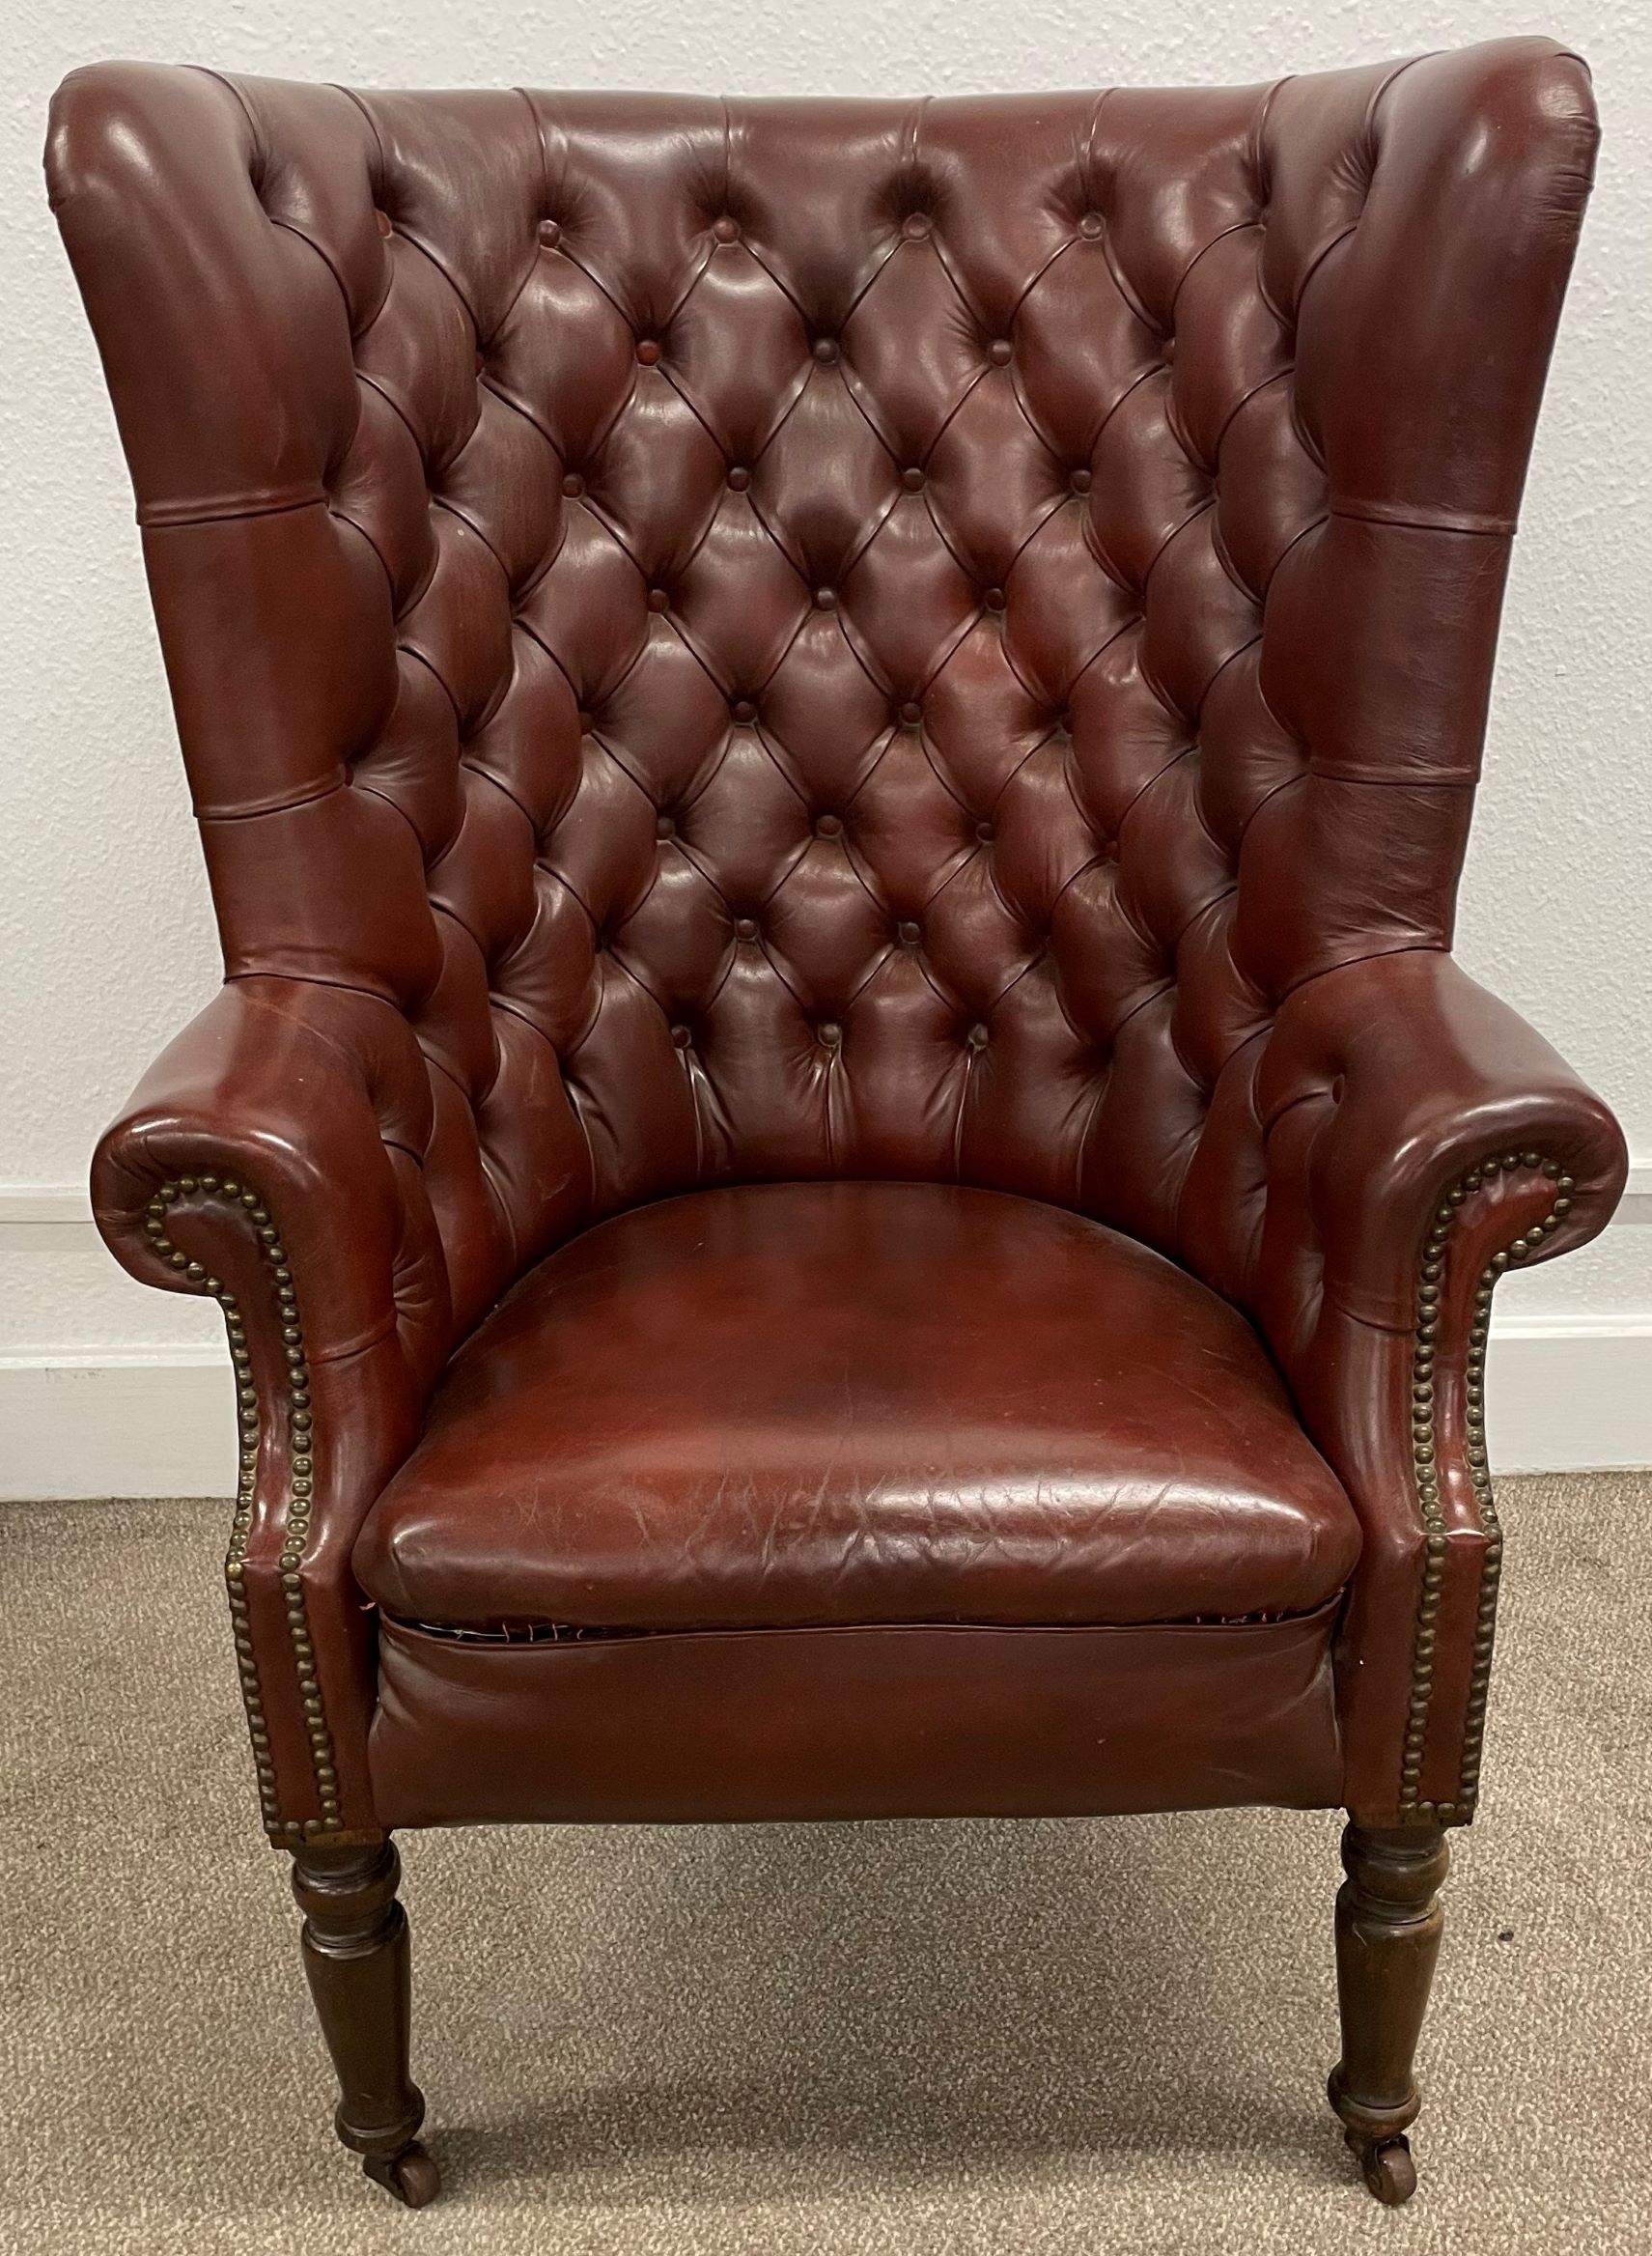 Possibly late 19th century leather button back barrel armchair on turned legs